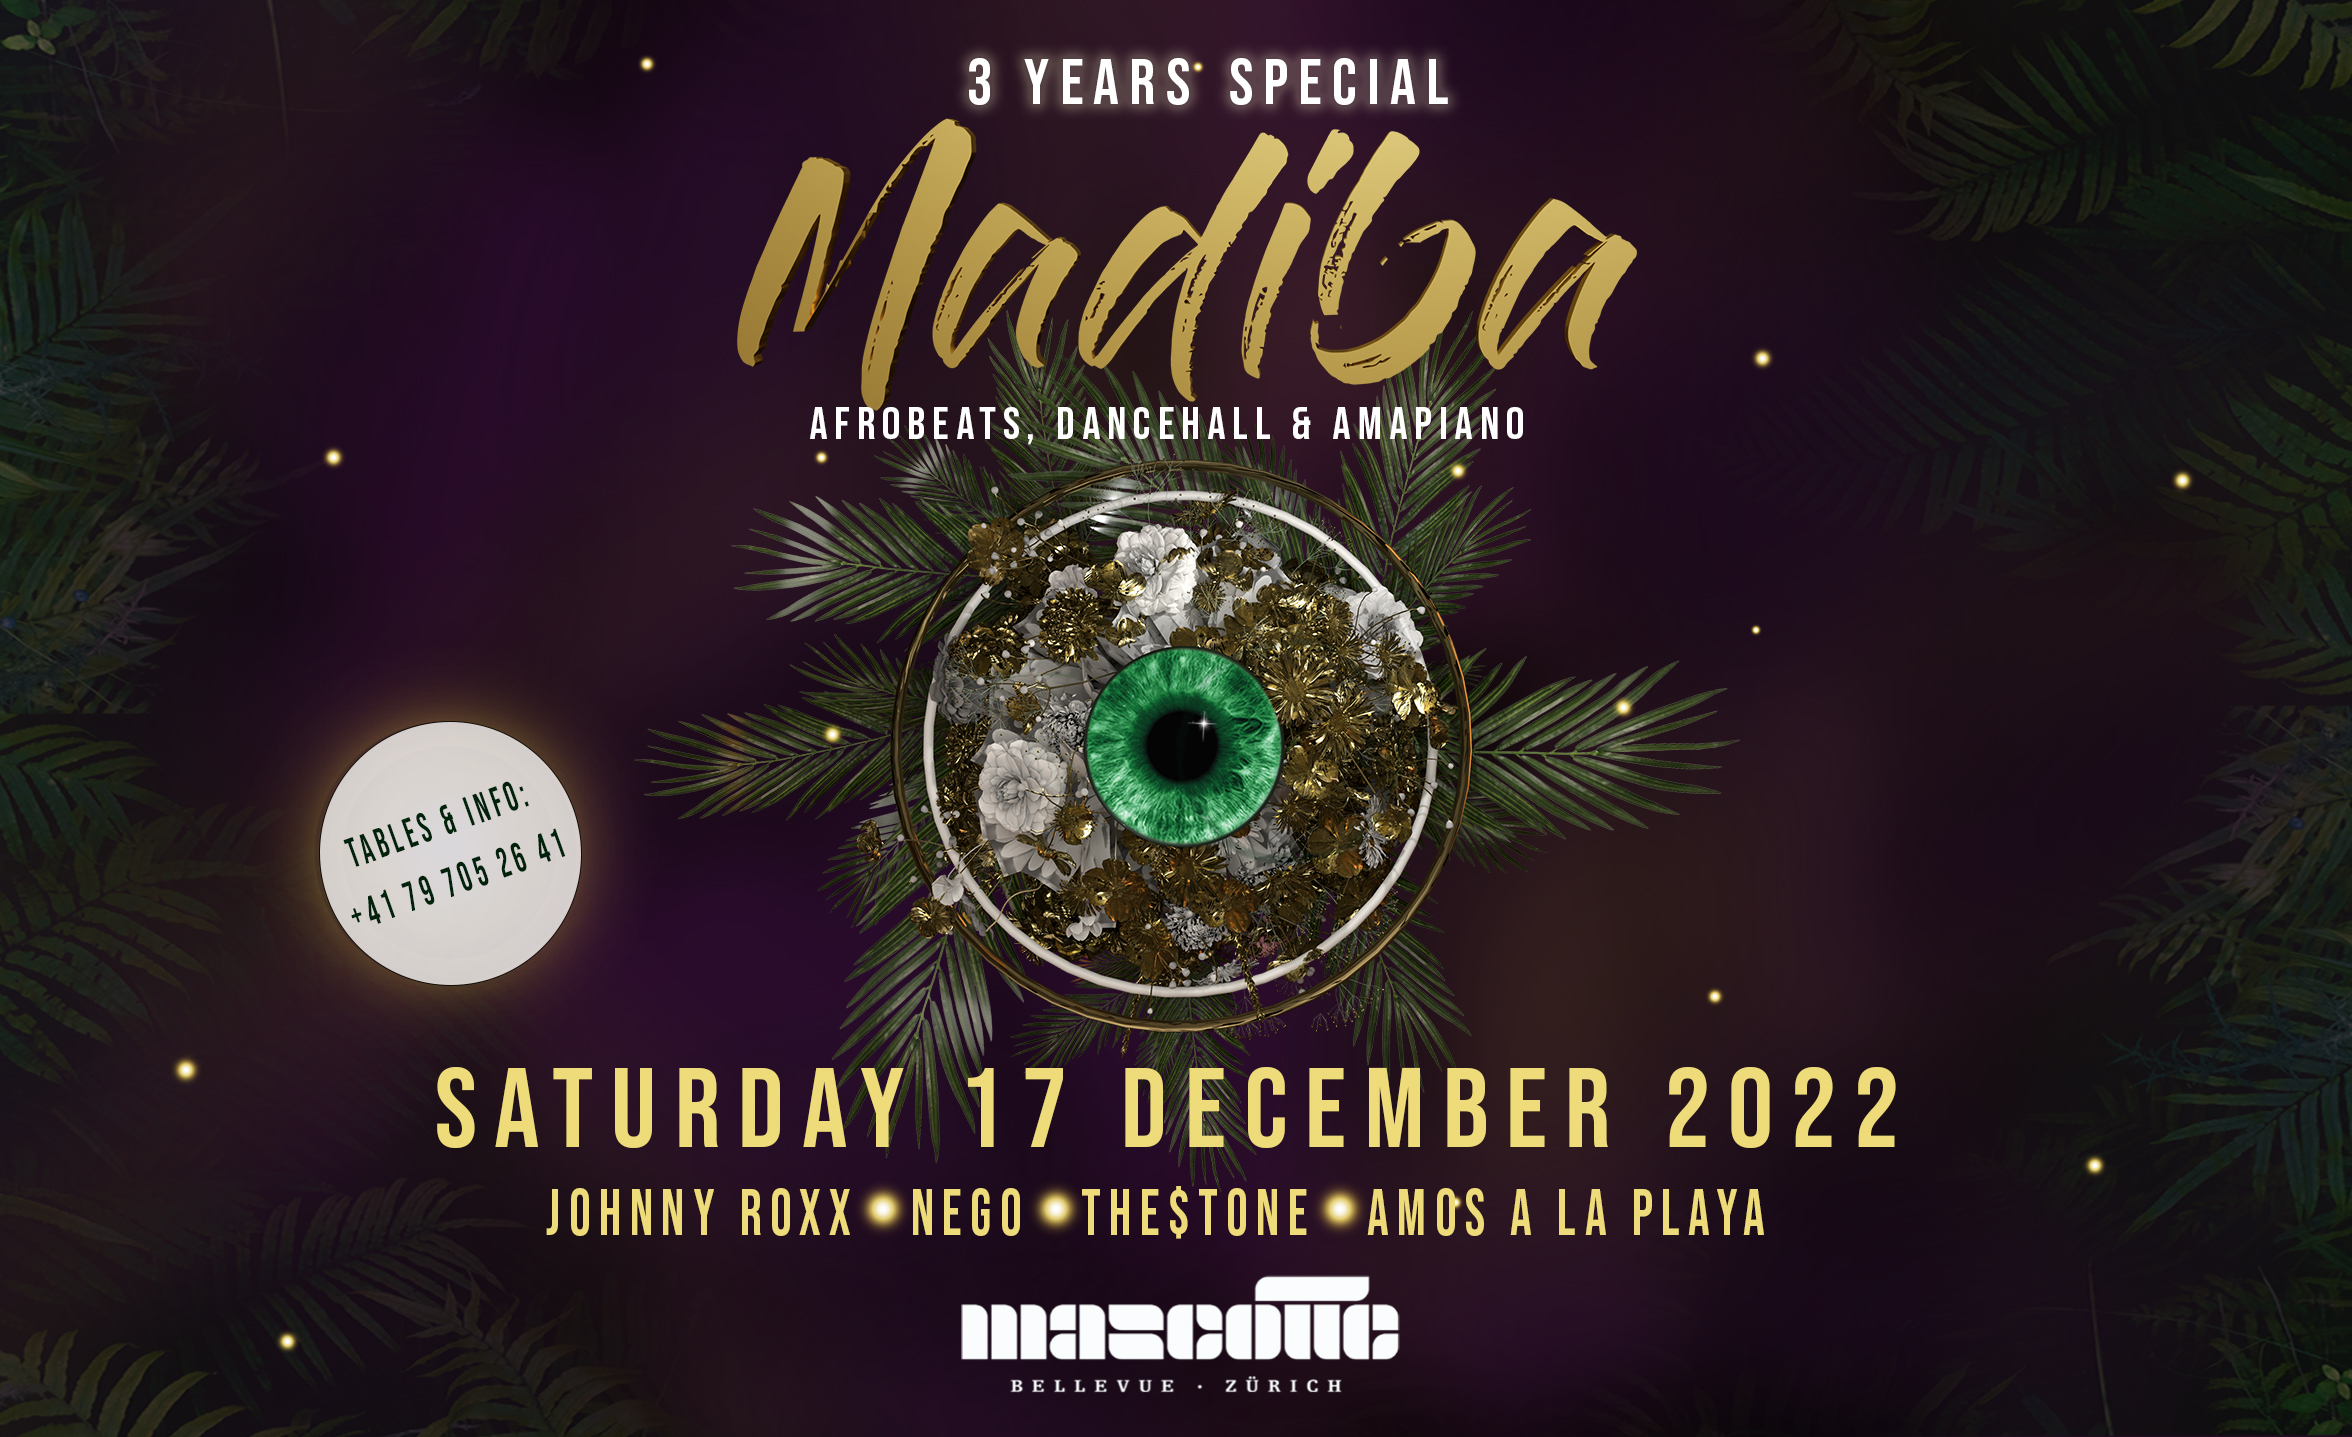 Event-Image for 'MADIBA - 3 YEARS SPECIAL'